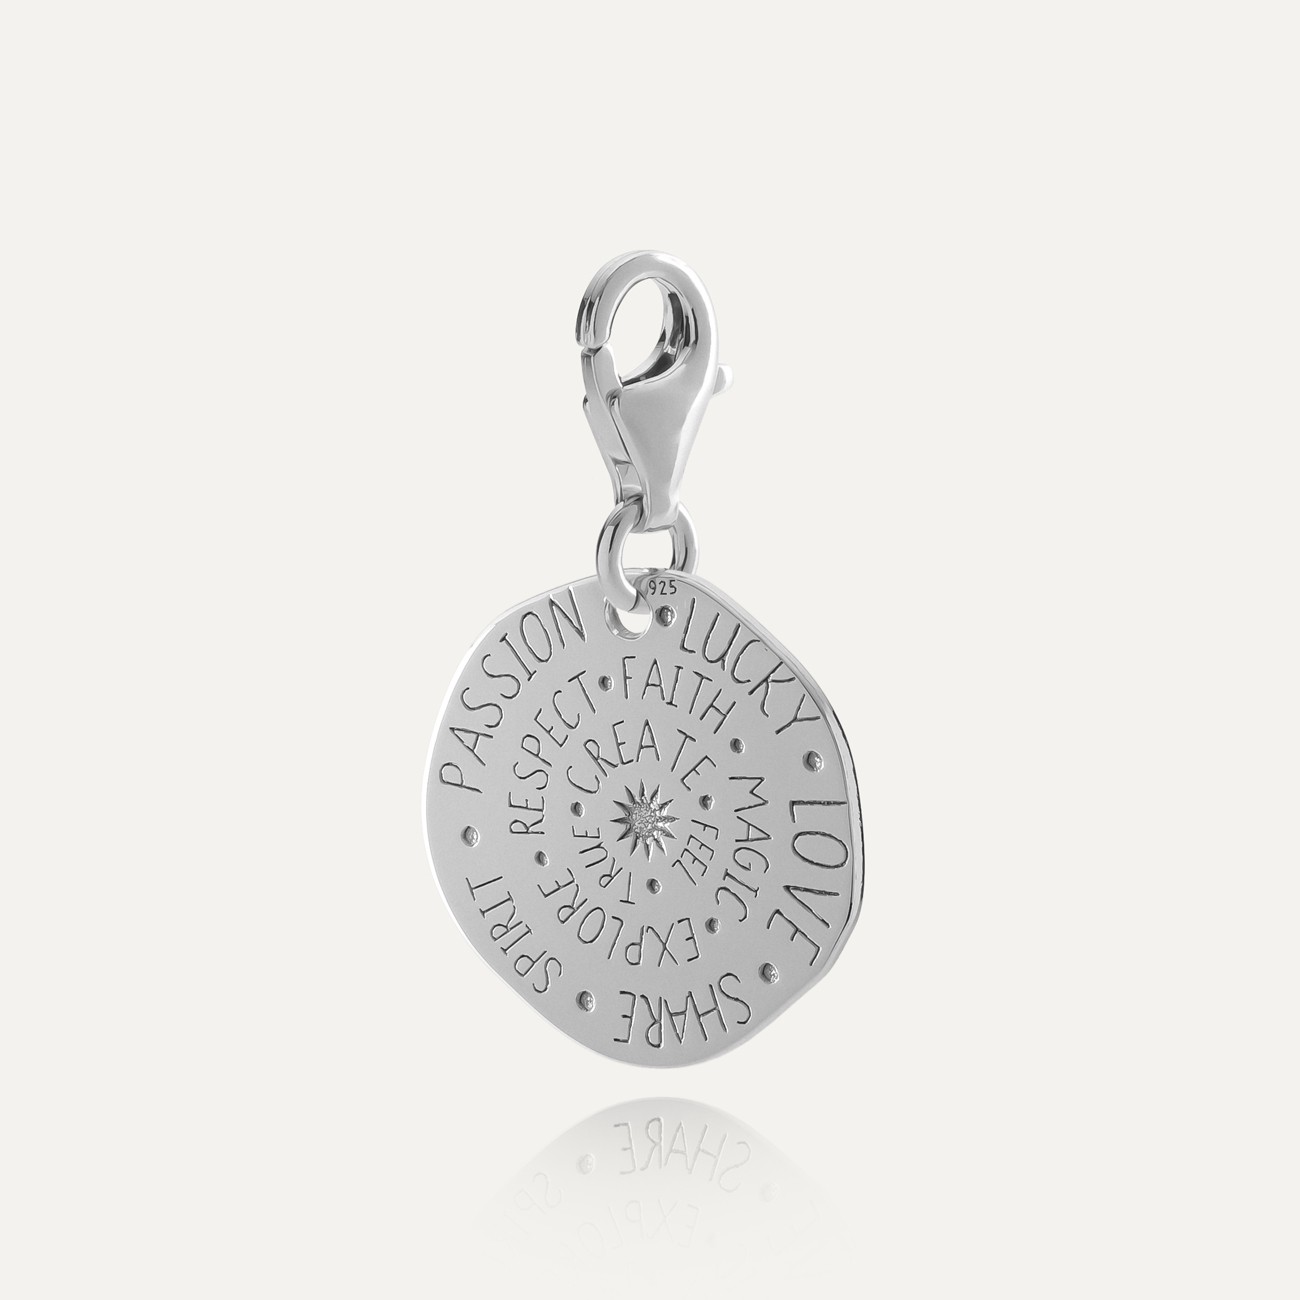 Joanna D'arc coin pendant charms bead sterling silver